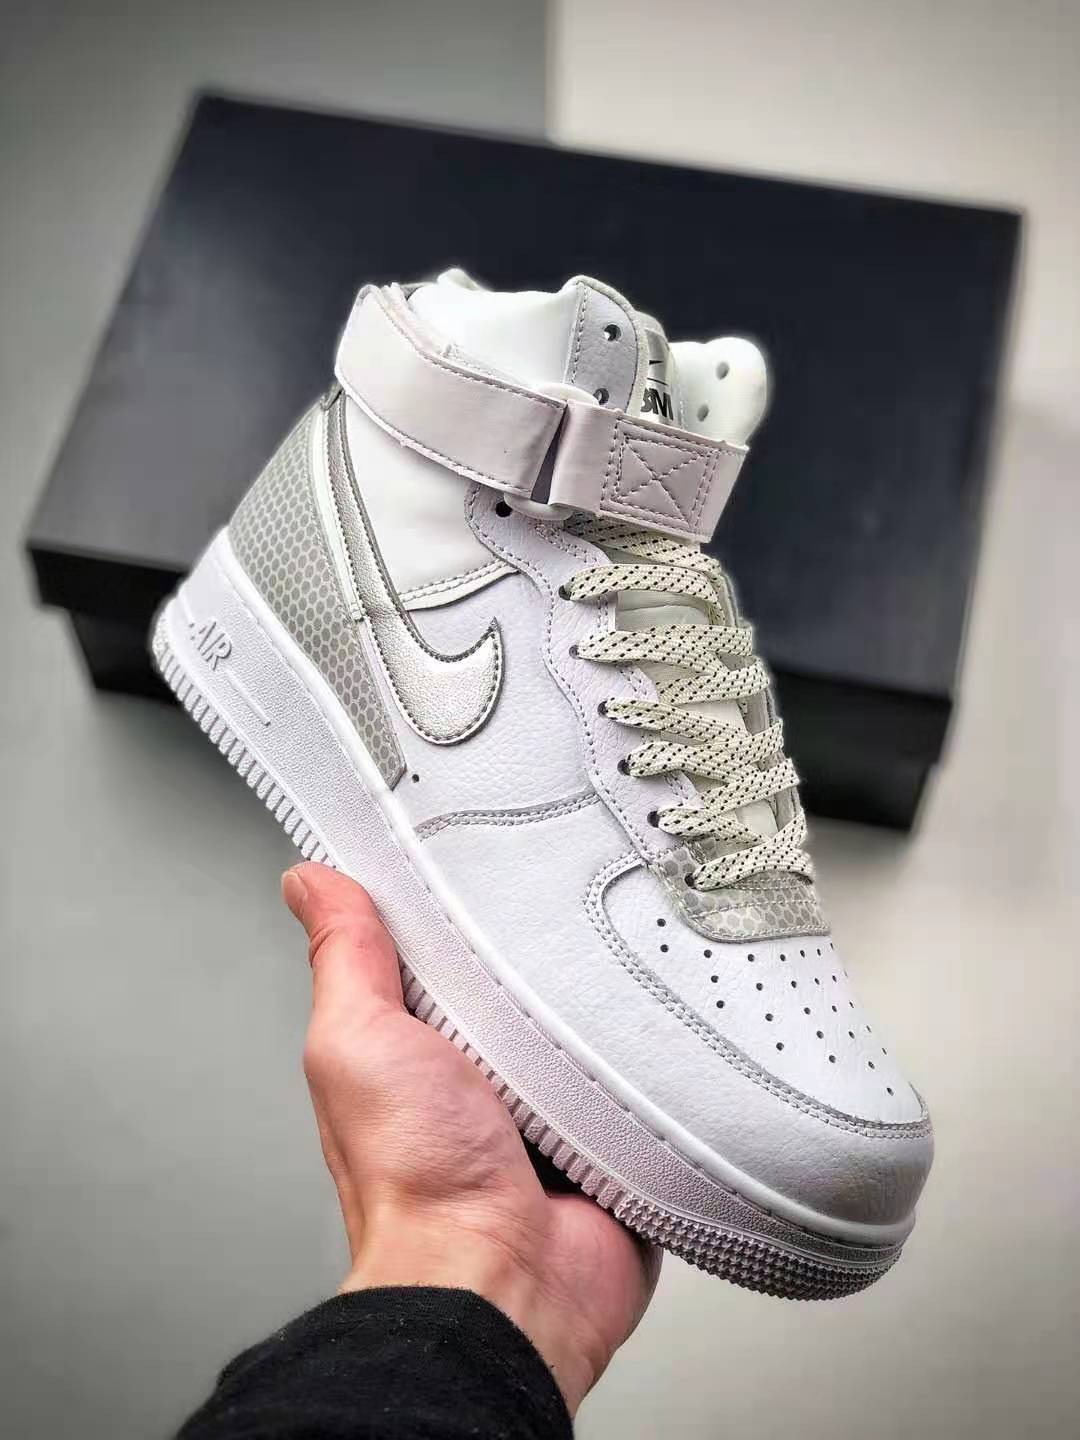 Nike 3M x Air Force 1 High 'Summit White' CU4159-100 - Limited Edition Sneaker for Sale